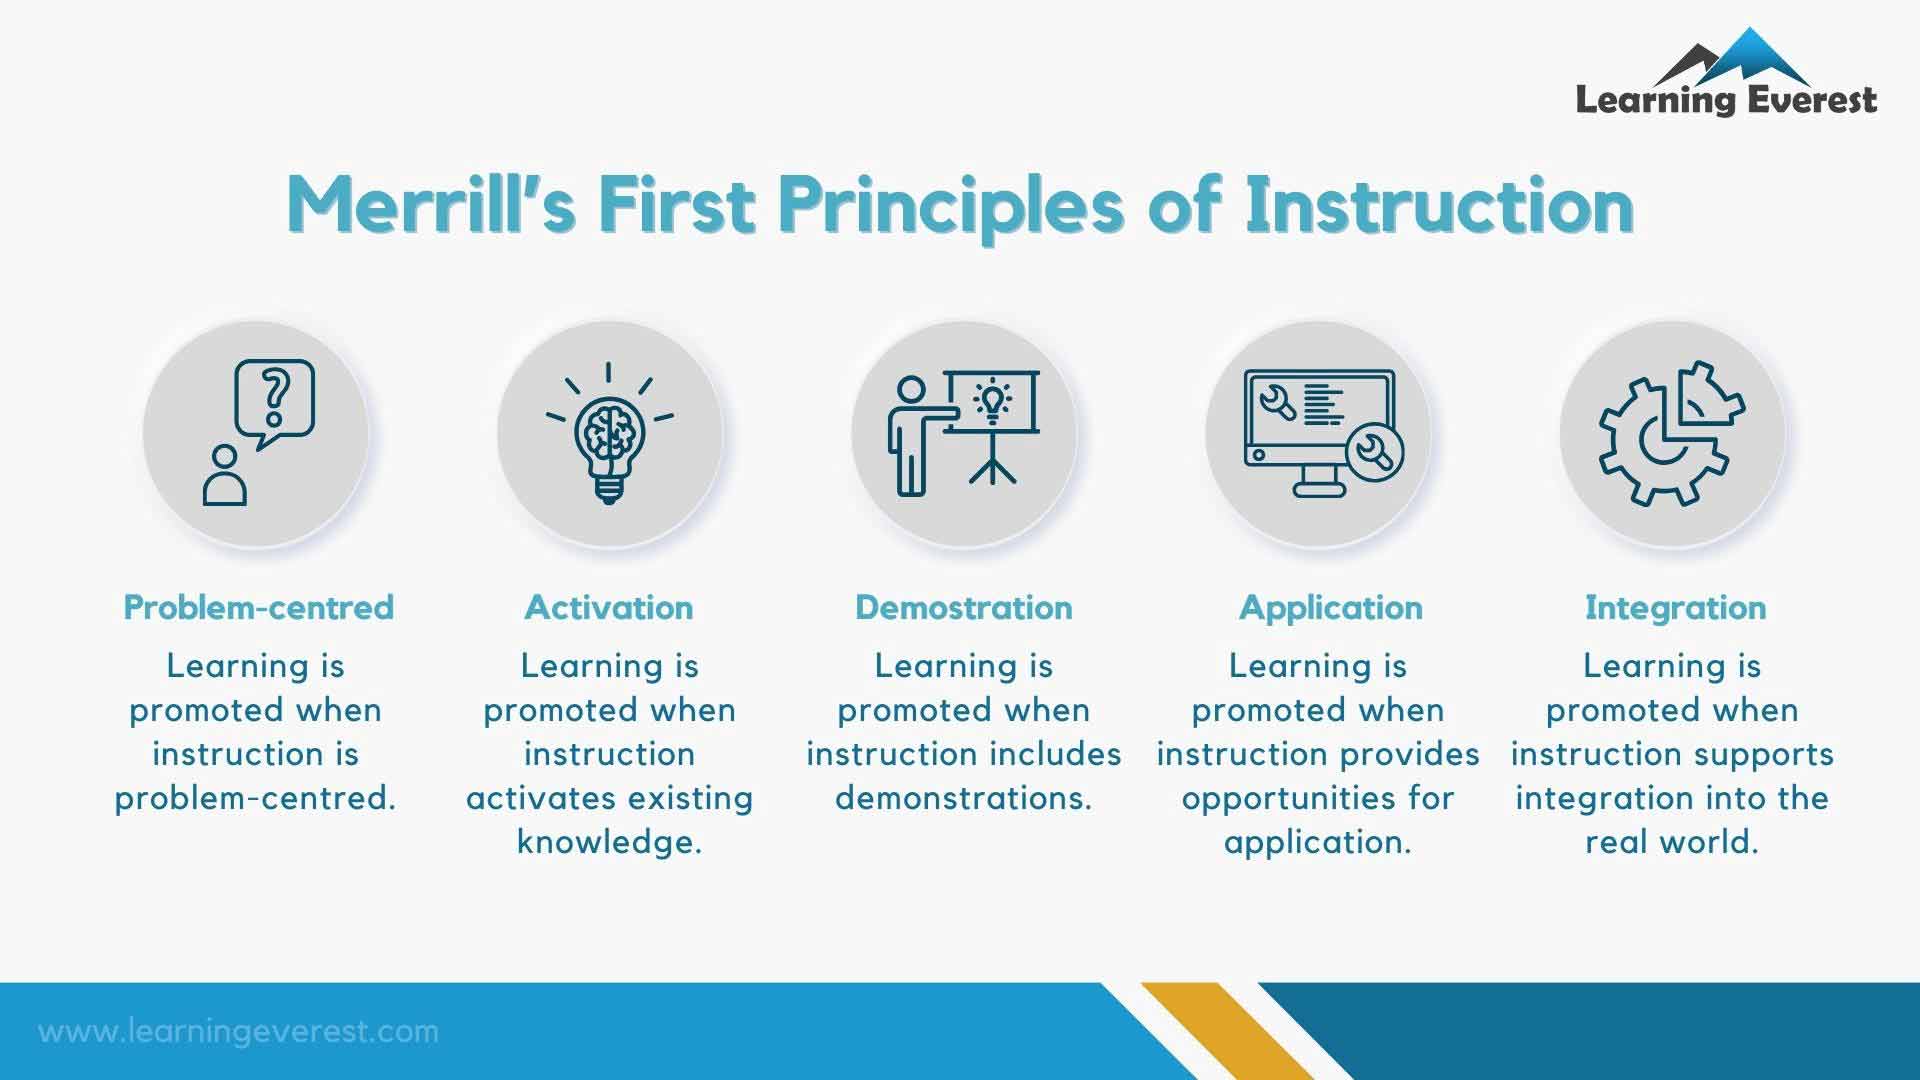 Merrill’s First Principles of Instruction